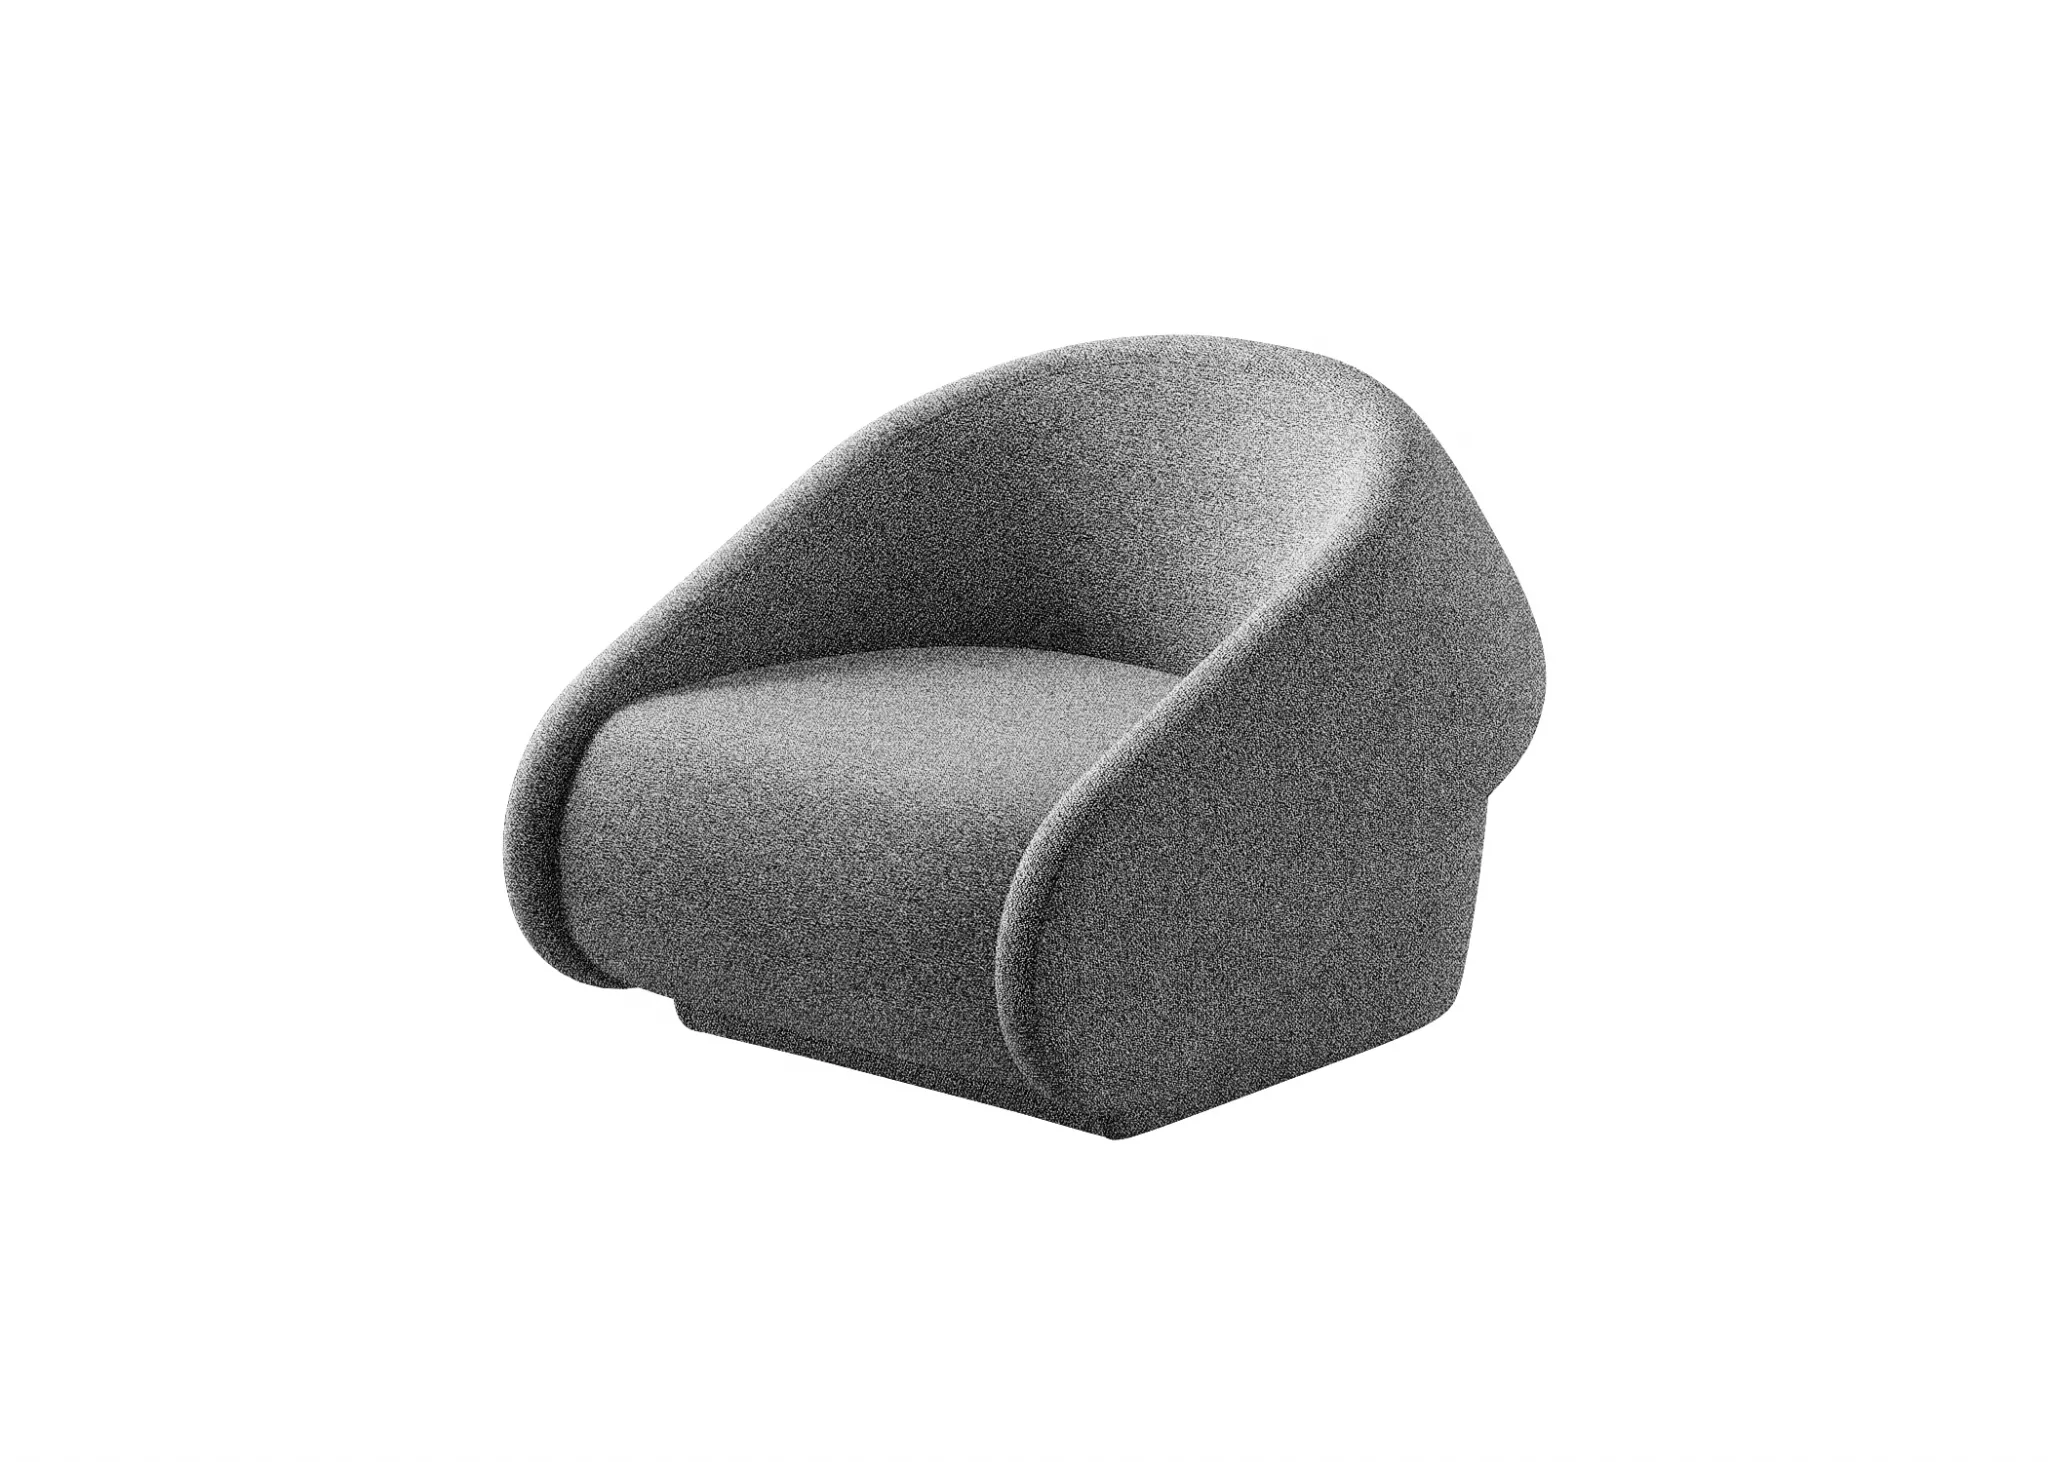 FURNITURE 3D MODELS – CHAIRS – 0038